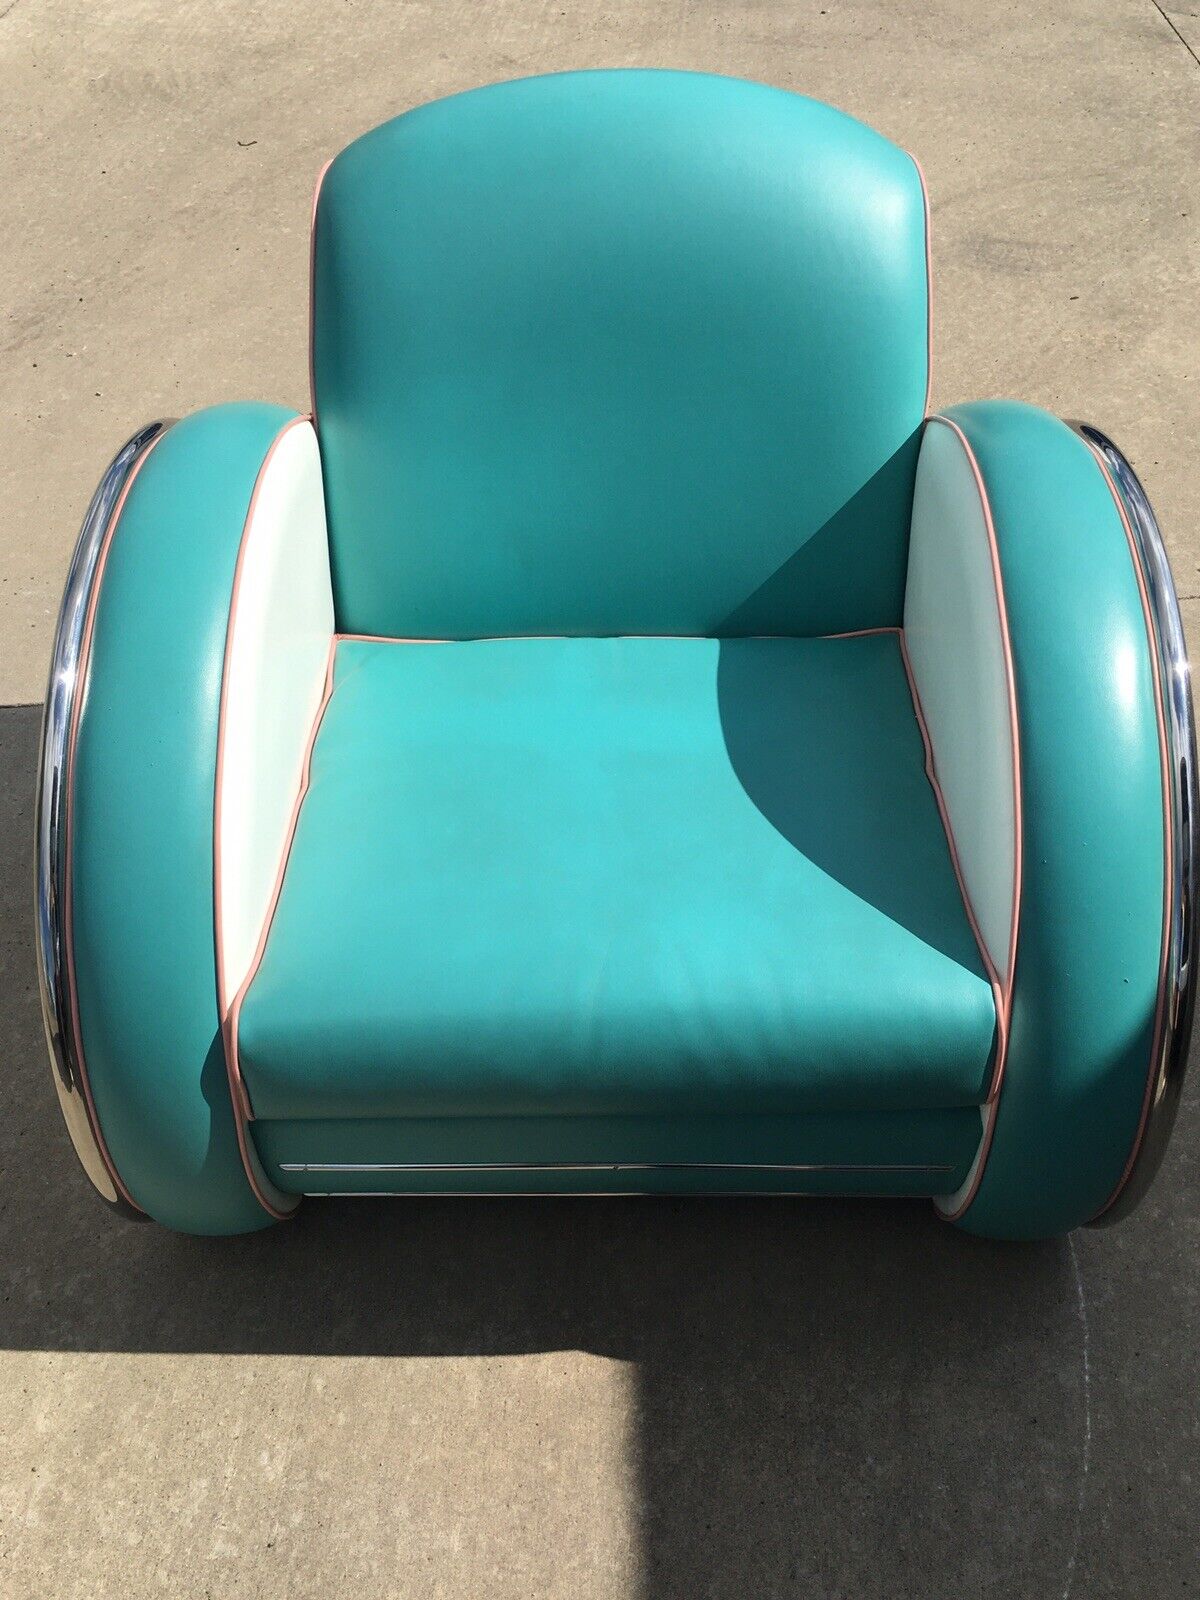 Antique Vintage Art Deco Club Chair In Turquoise And White